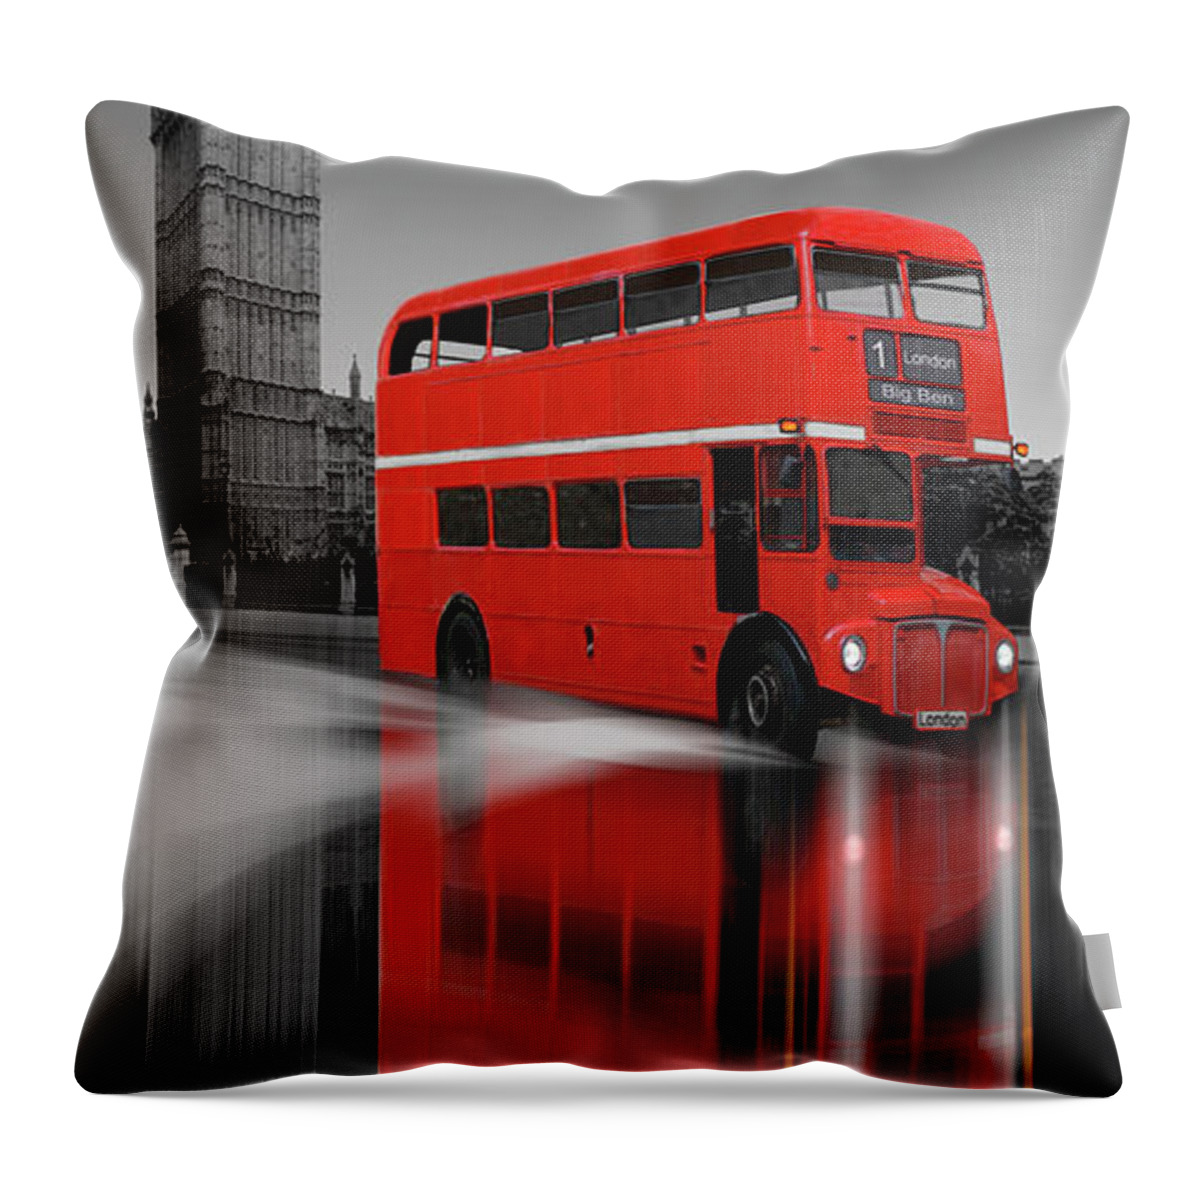 Red Bus Throw Pillow featuring the digital art London Red Bus Big Ben Reflection by Joe Tamassy